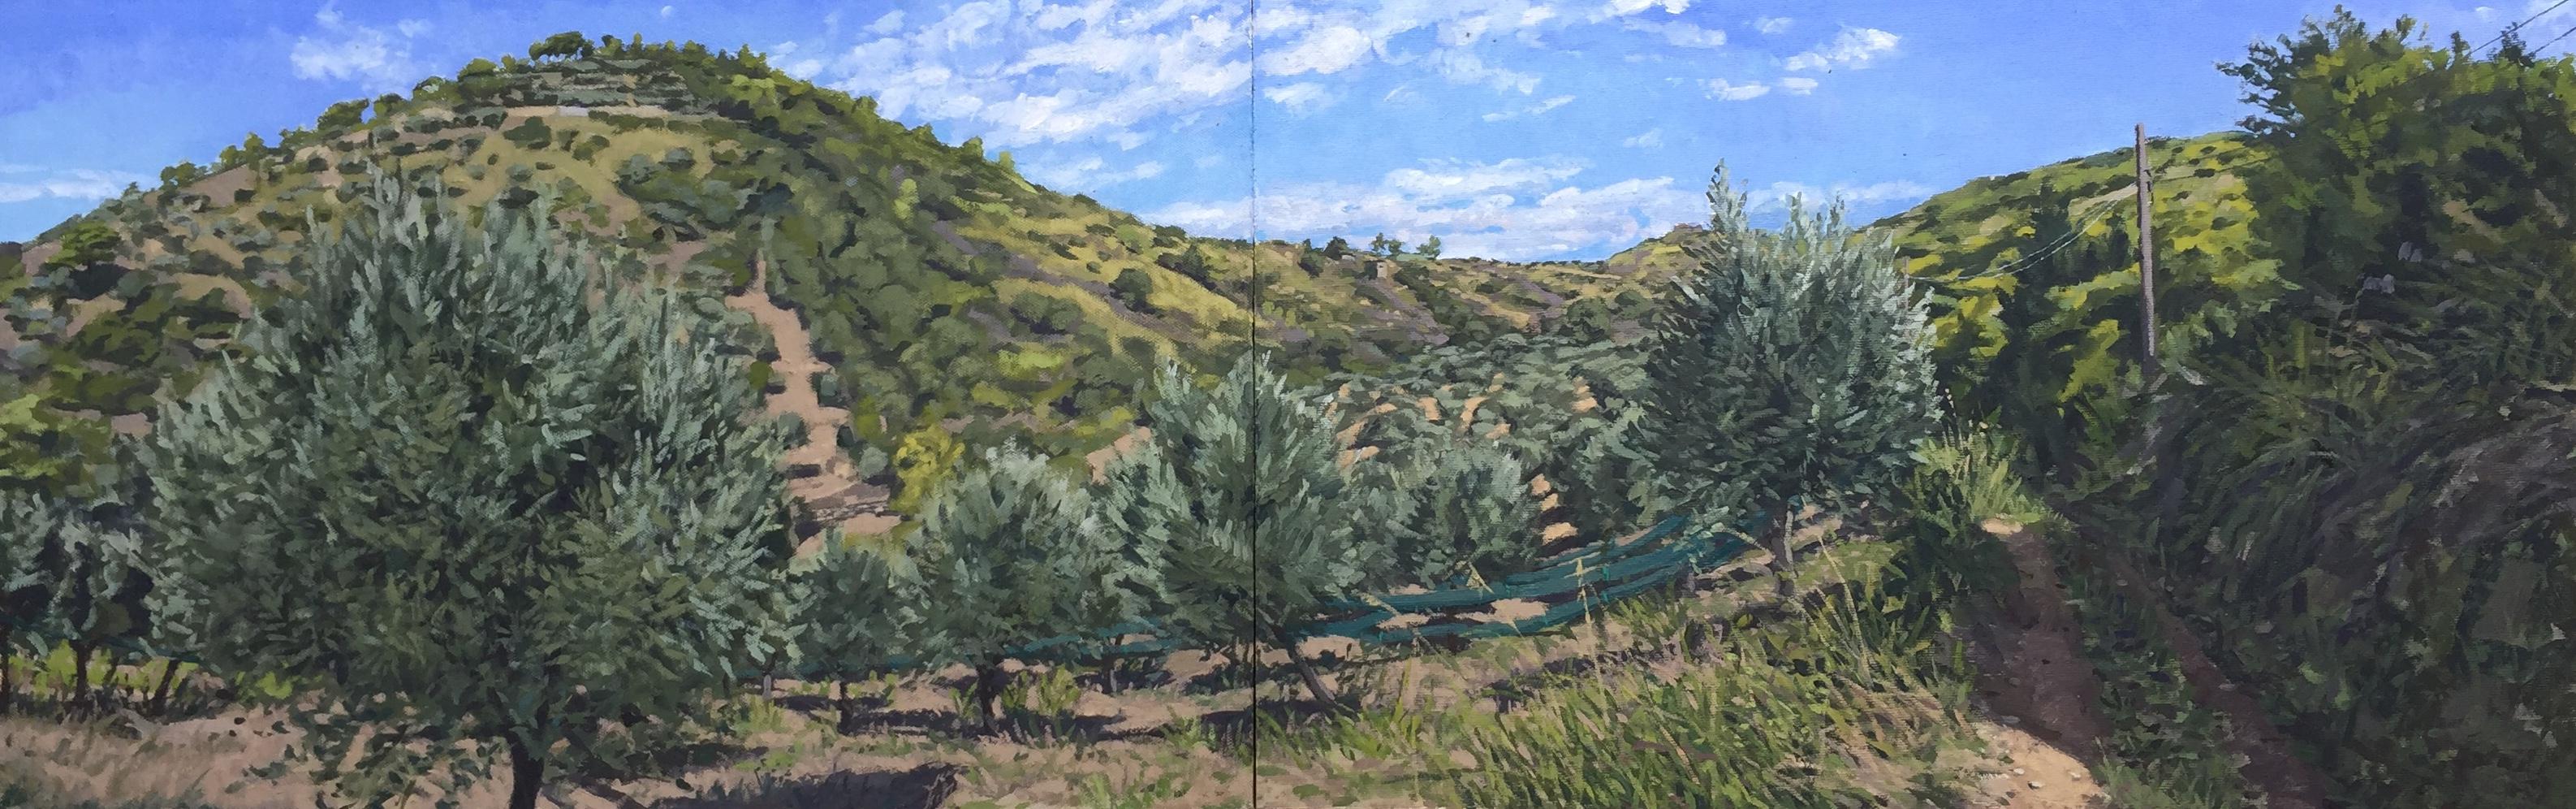 Todd Gordon Landscape Painting - Valley of Olive Trees, Santa Maria di Castellbate 